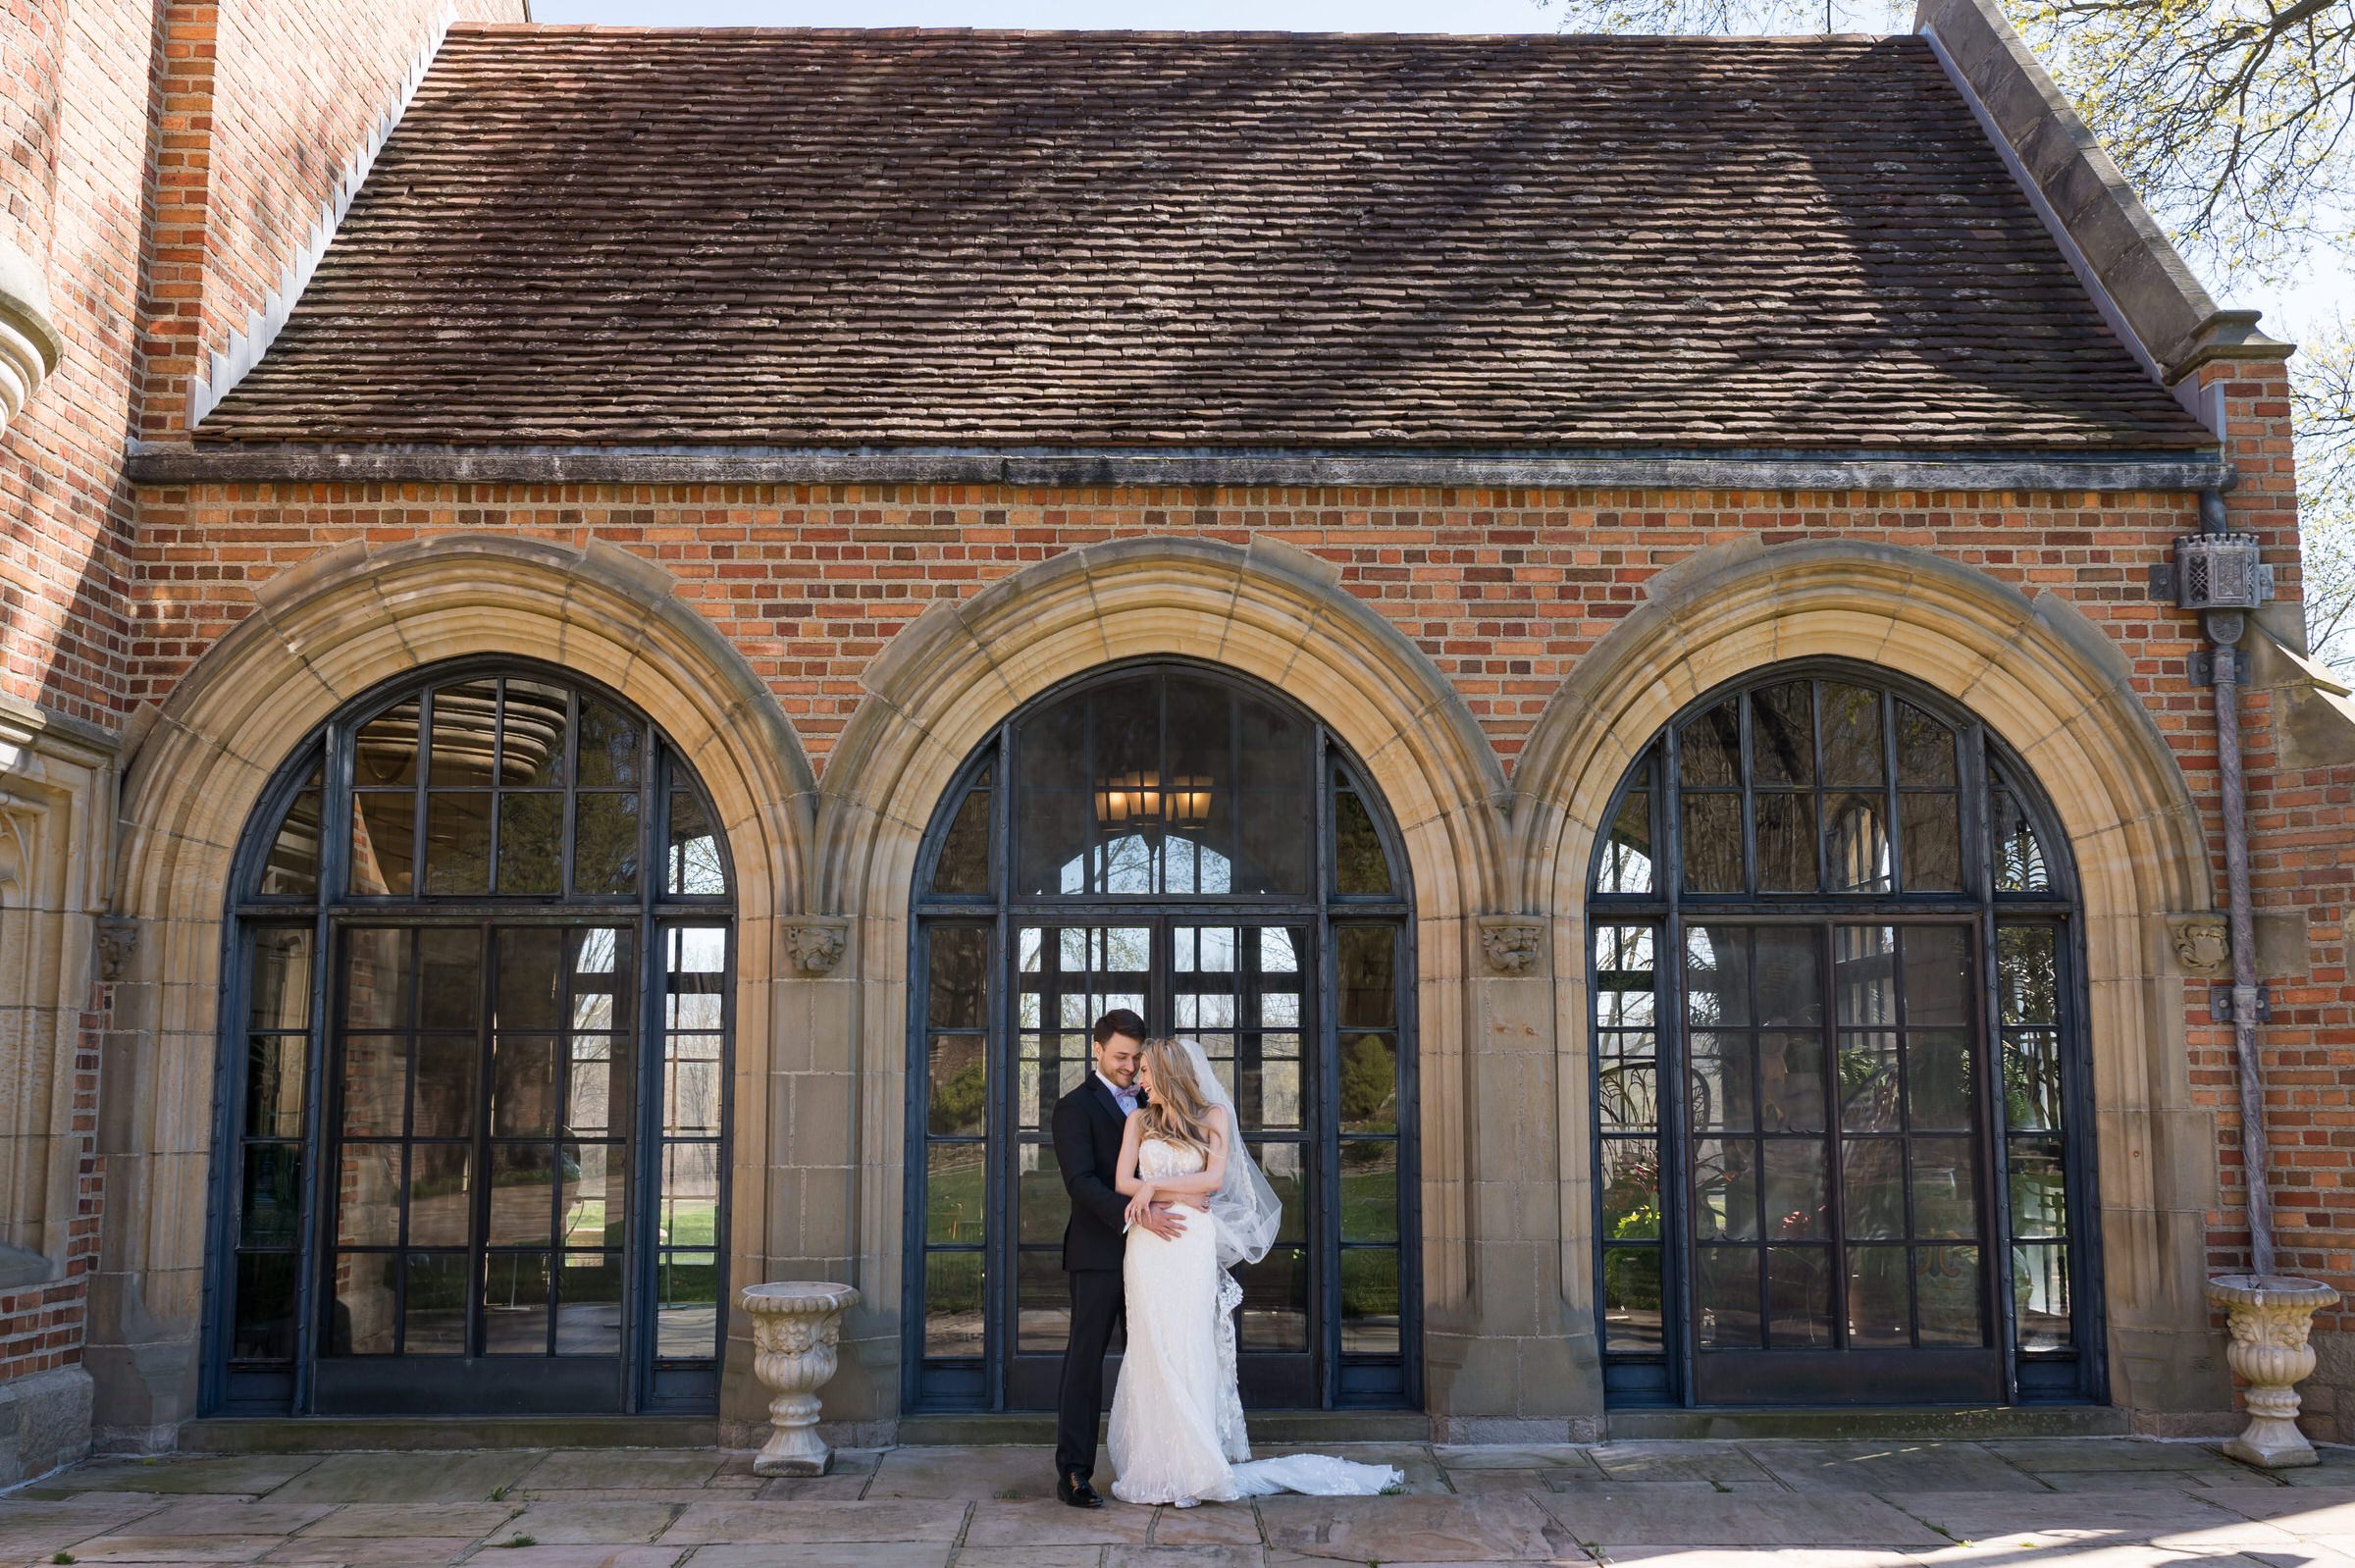 A bride and groom stand in front of windows at their Meadowbrook wedding.  